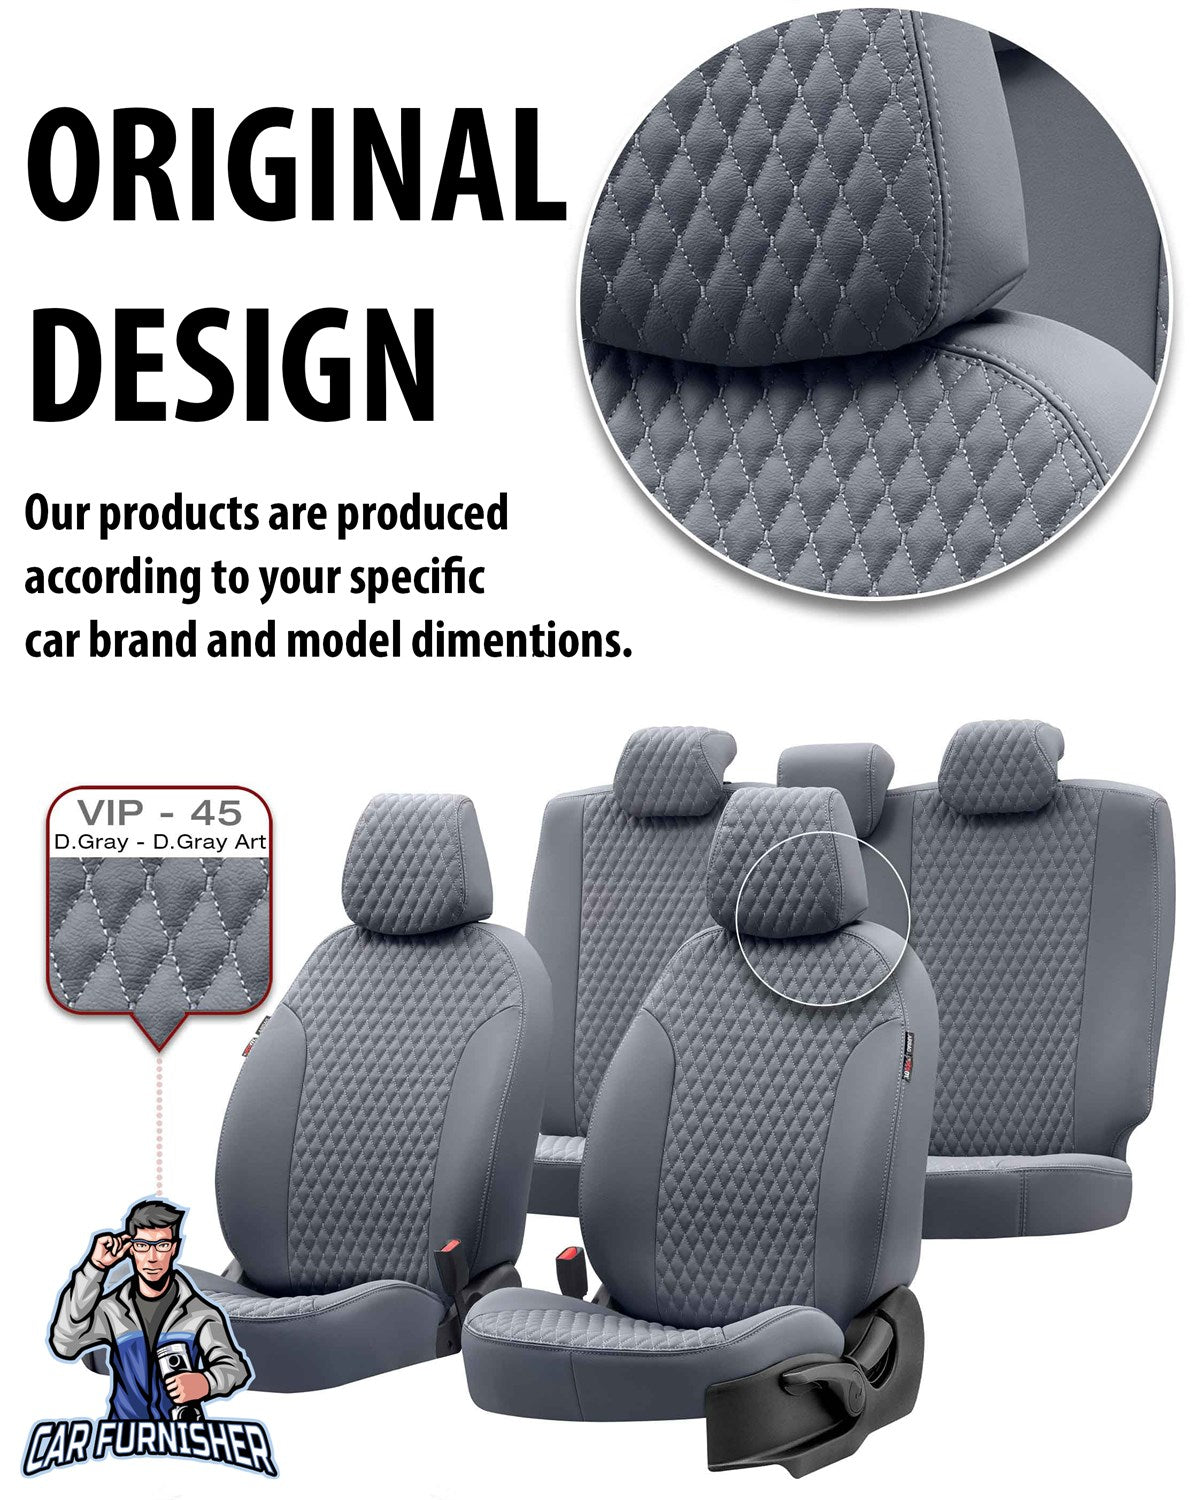 VW Beetle Car Seat Cover 2011-2017 A5 Amsterdam Design Black Full Leather